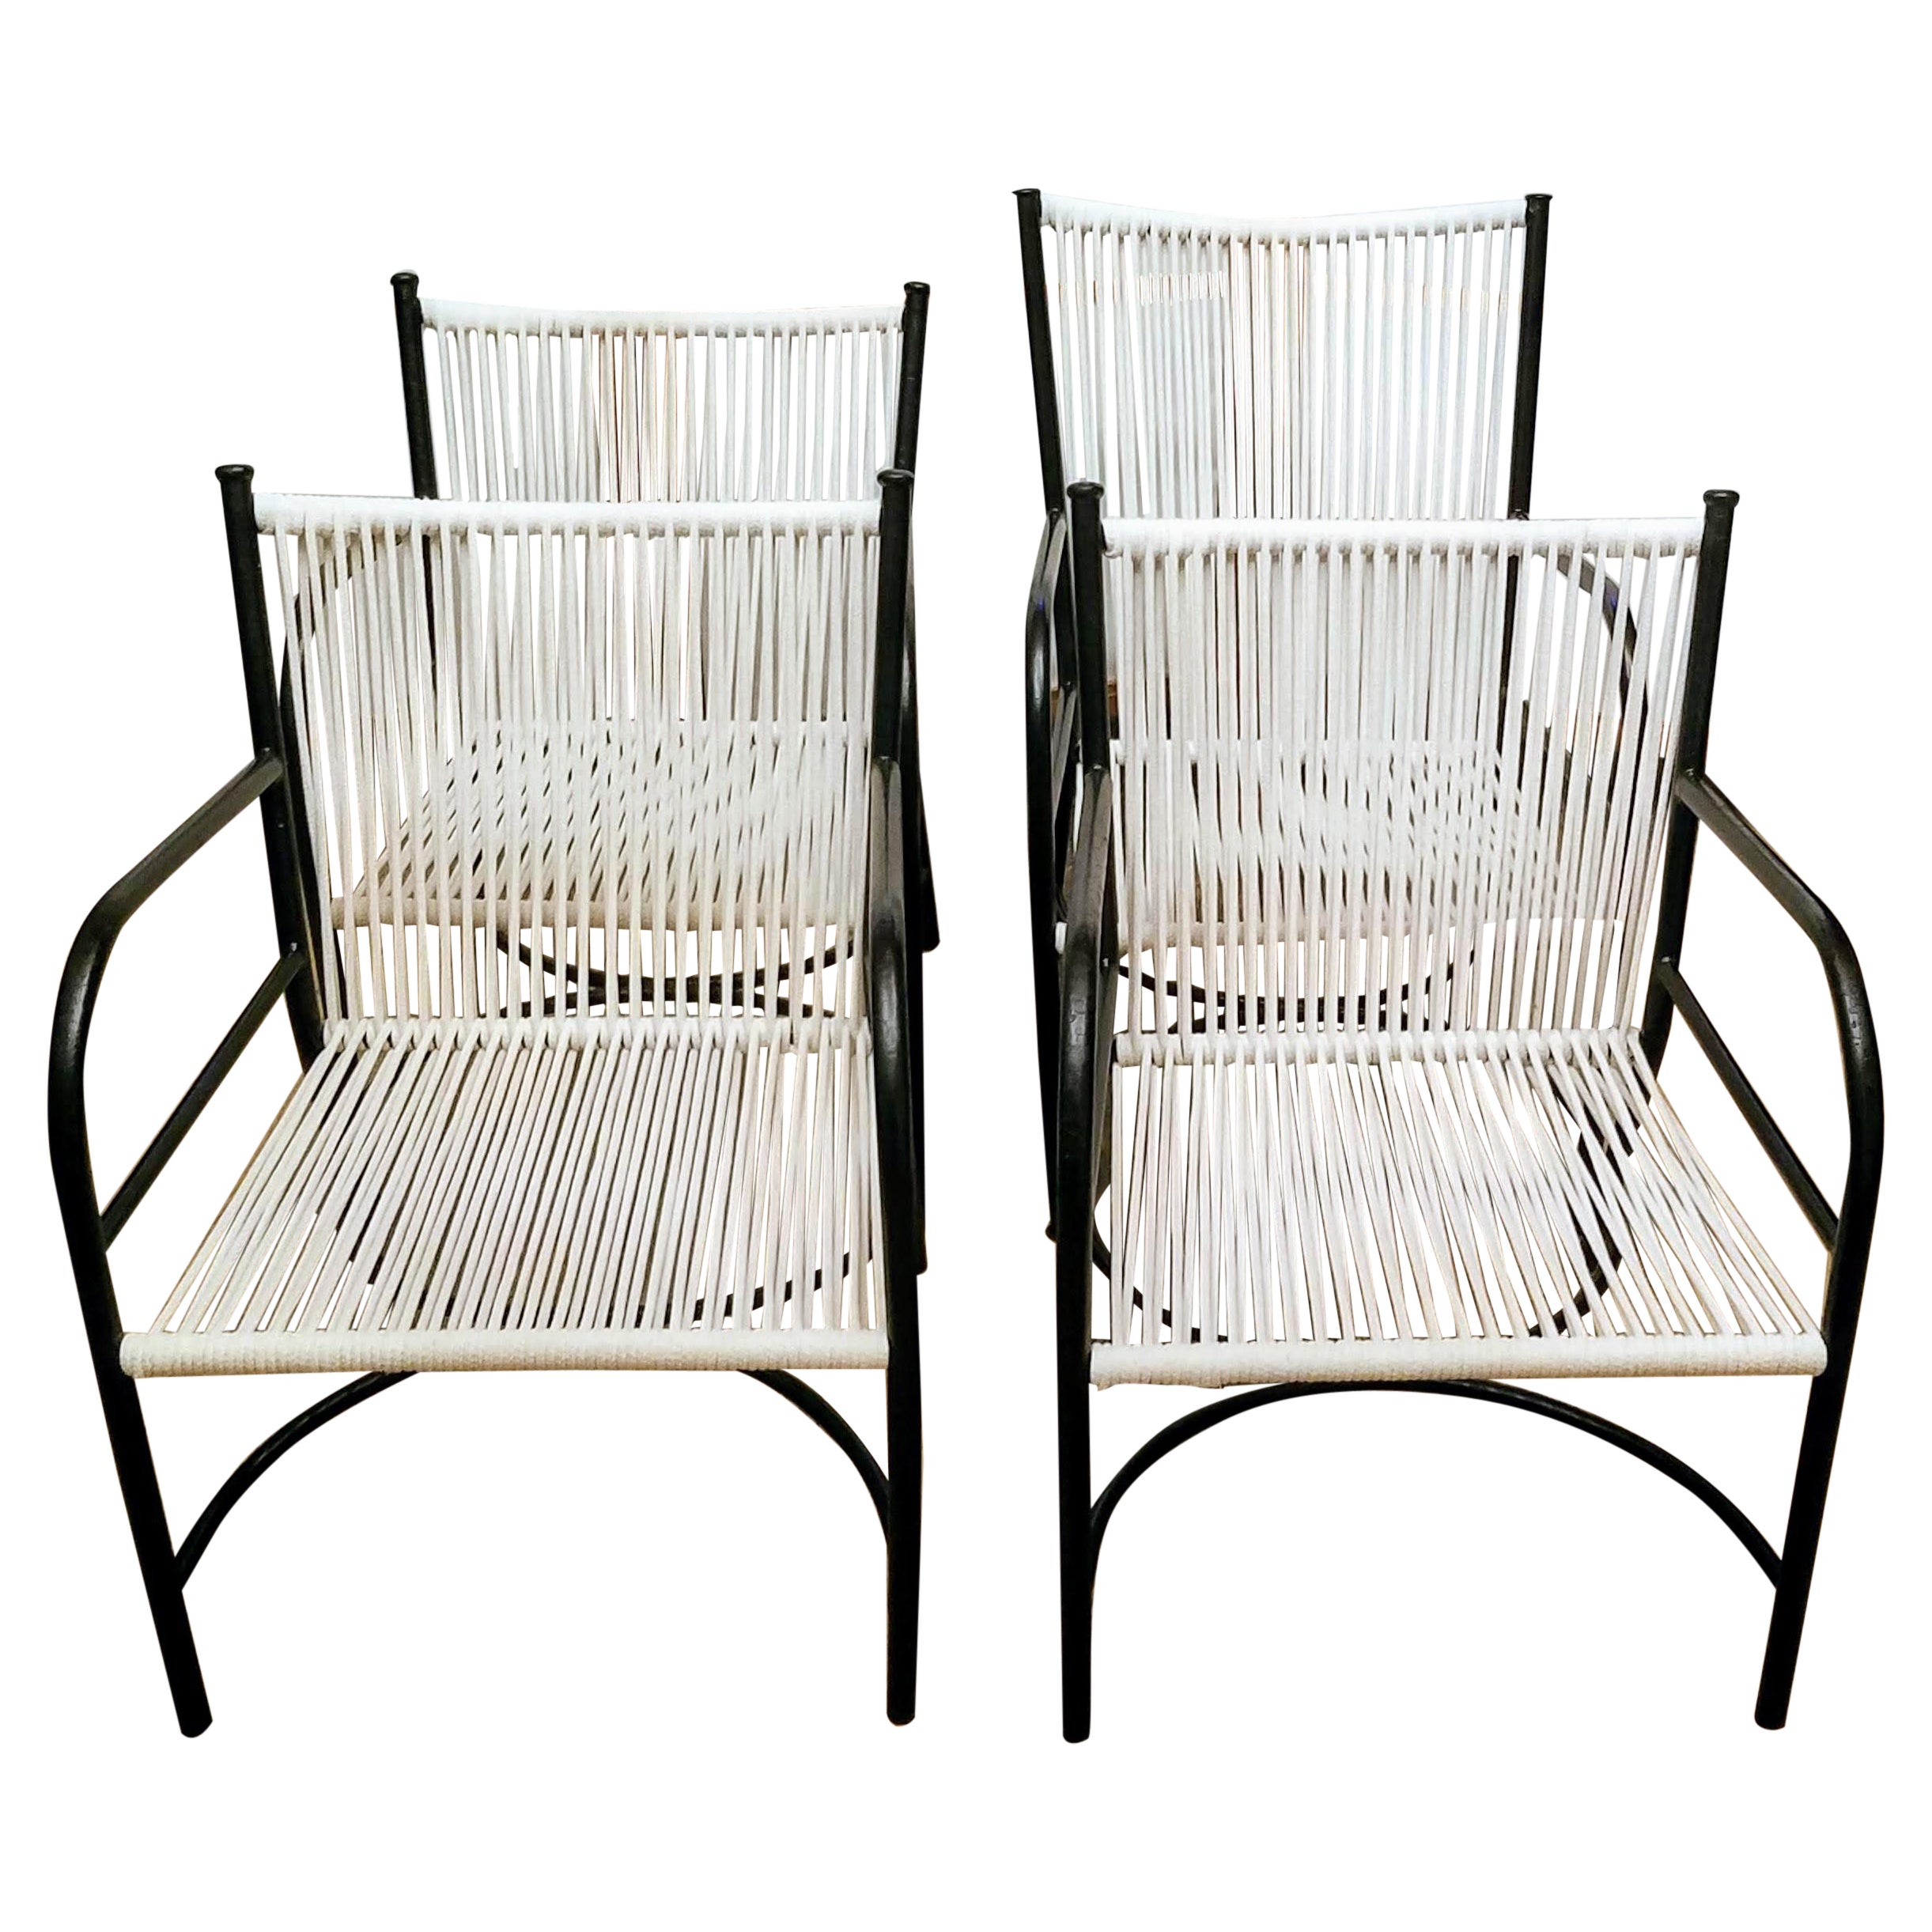 Robert Lewis Set of Four Lounge Chairs Studio Crafted Santa Barbara, CA. 1940s For Sale